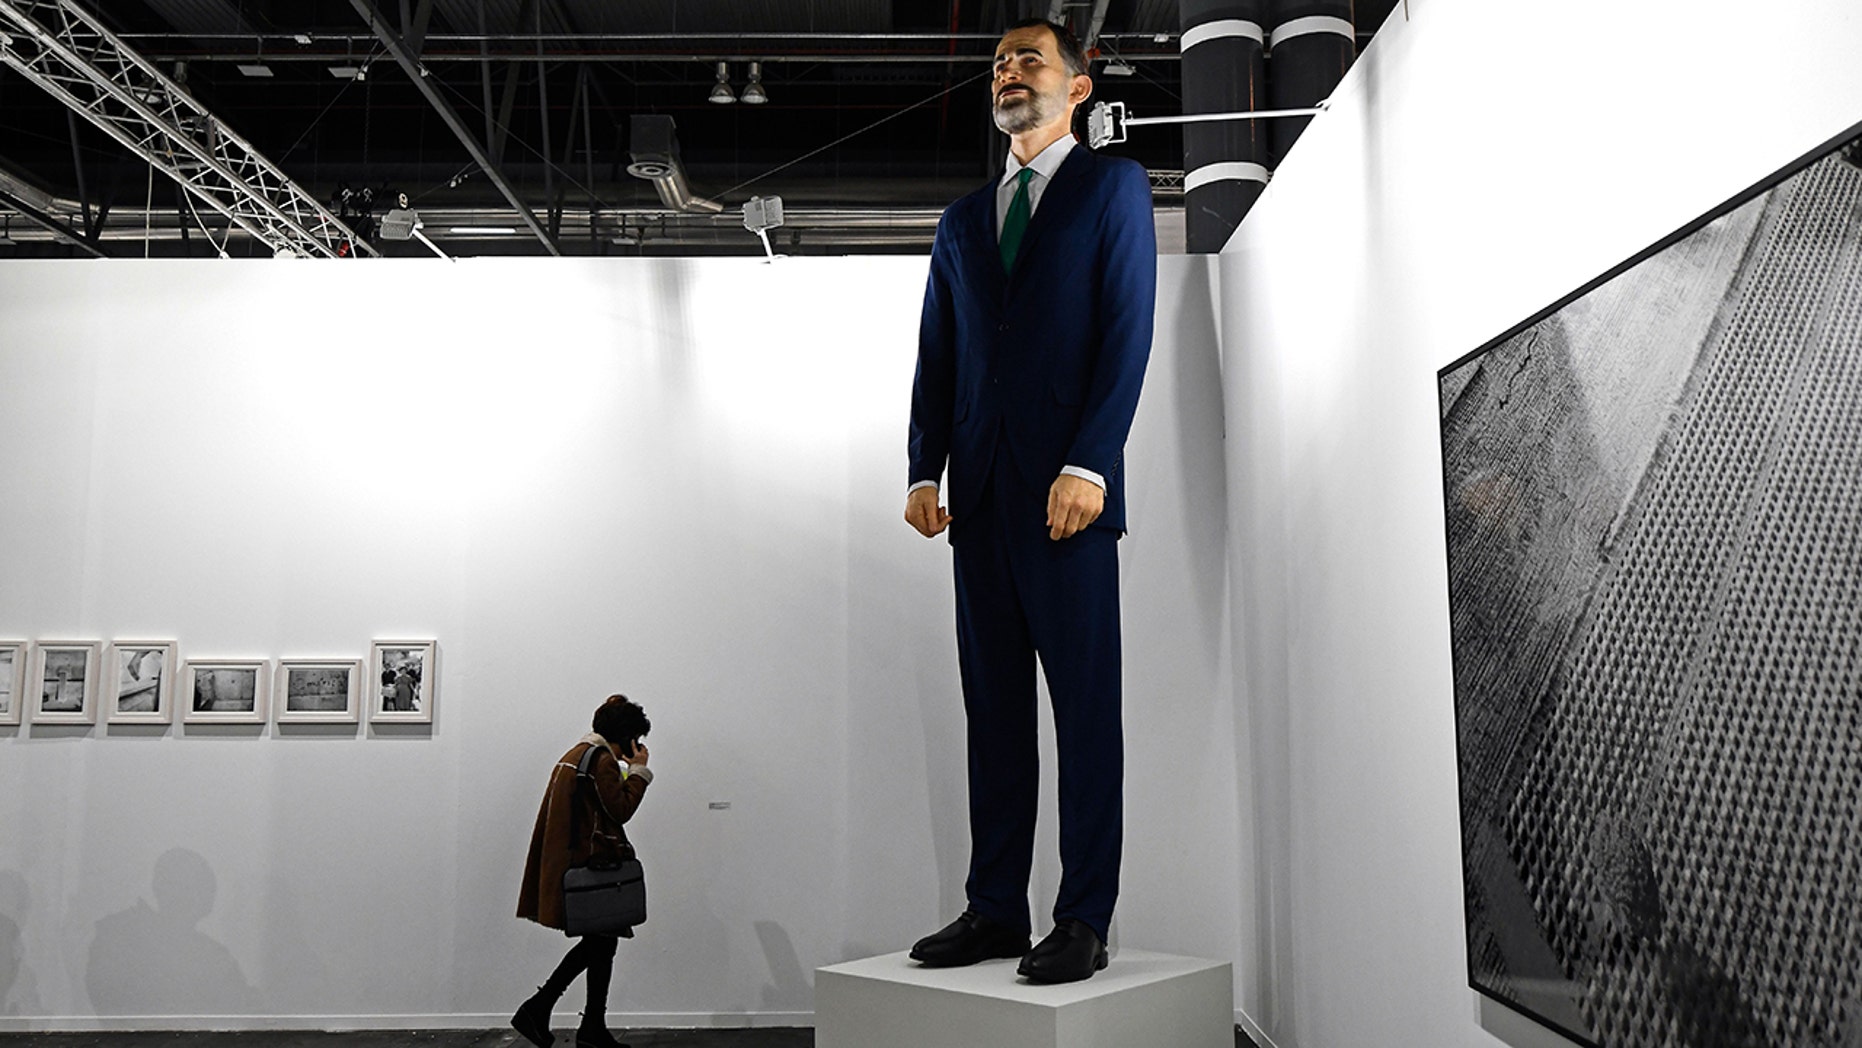 A woman talks on her mobile phone next to "Ninot", a giant sculpture depicting Spain's King Felipe VI by artists Santiago Sierra and Eugenio Merino, during preparations for the International Contemporary Art Fair (ARCO) in Madrid on February 26, 2019 on the eve of its inauguration. 